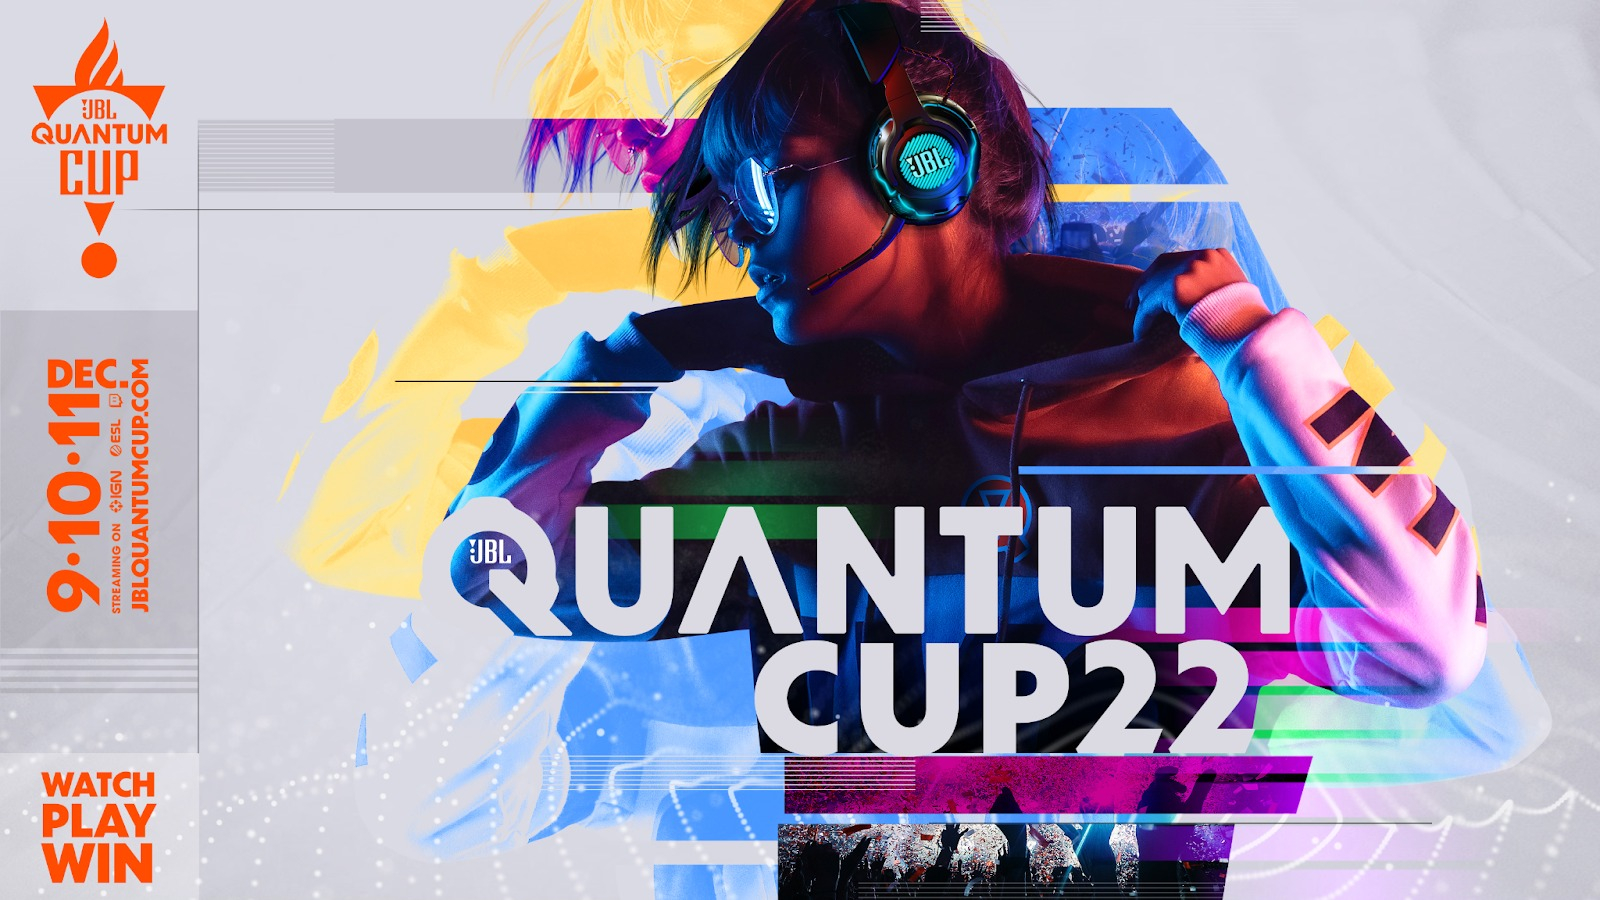 Rise to the challenge of the JBL Quantum Cup 2022 returning for its third year — GAMINGTREND